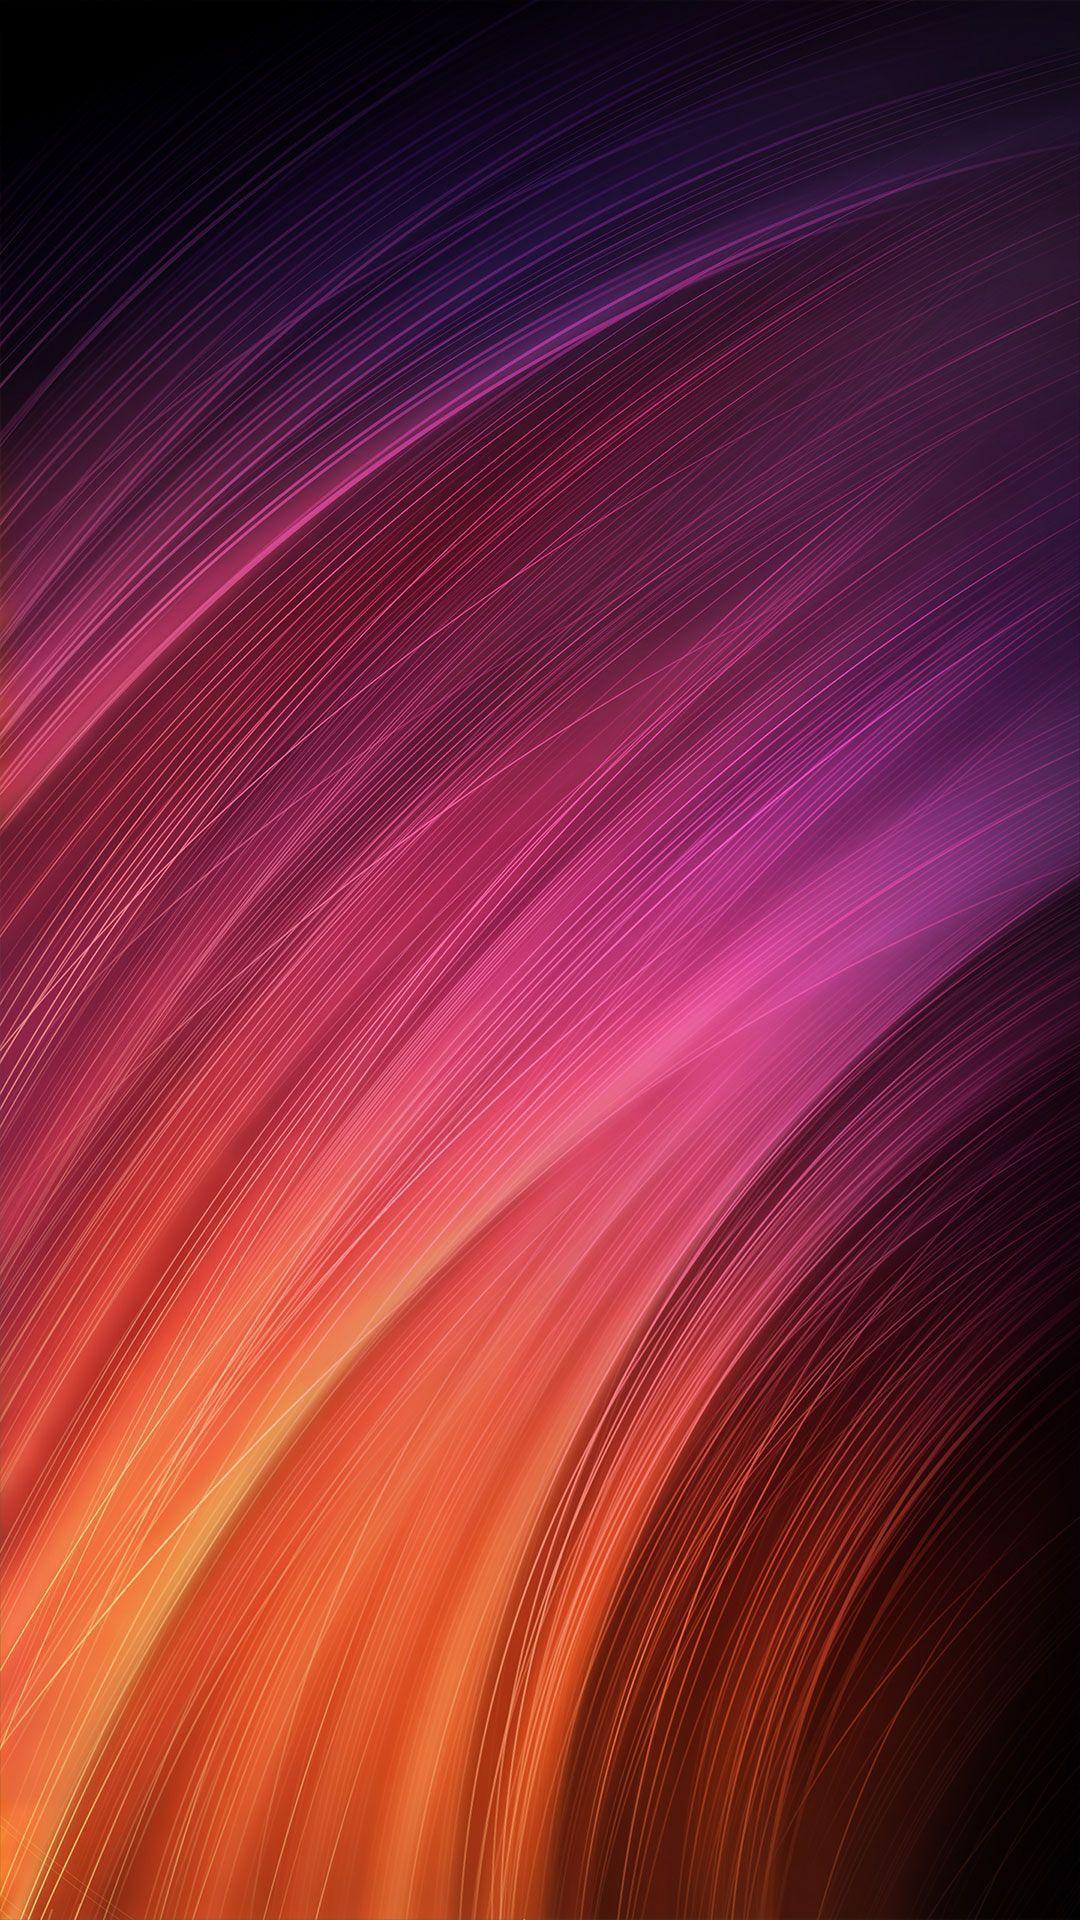 Redmi Note 4 stock wallpaper collection, Download it here. Xiaomi